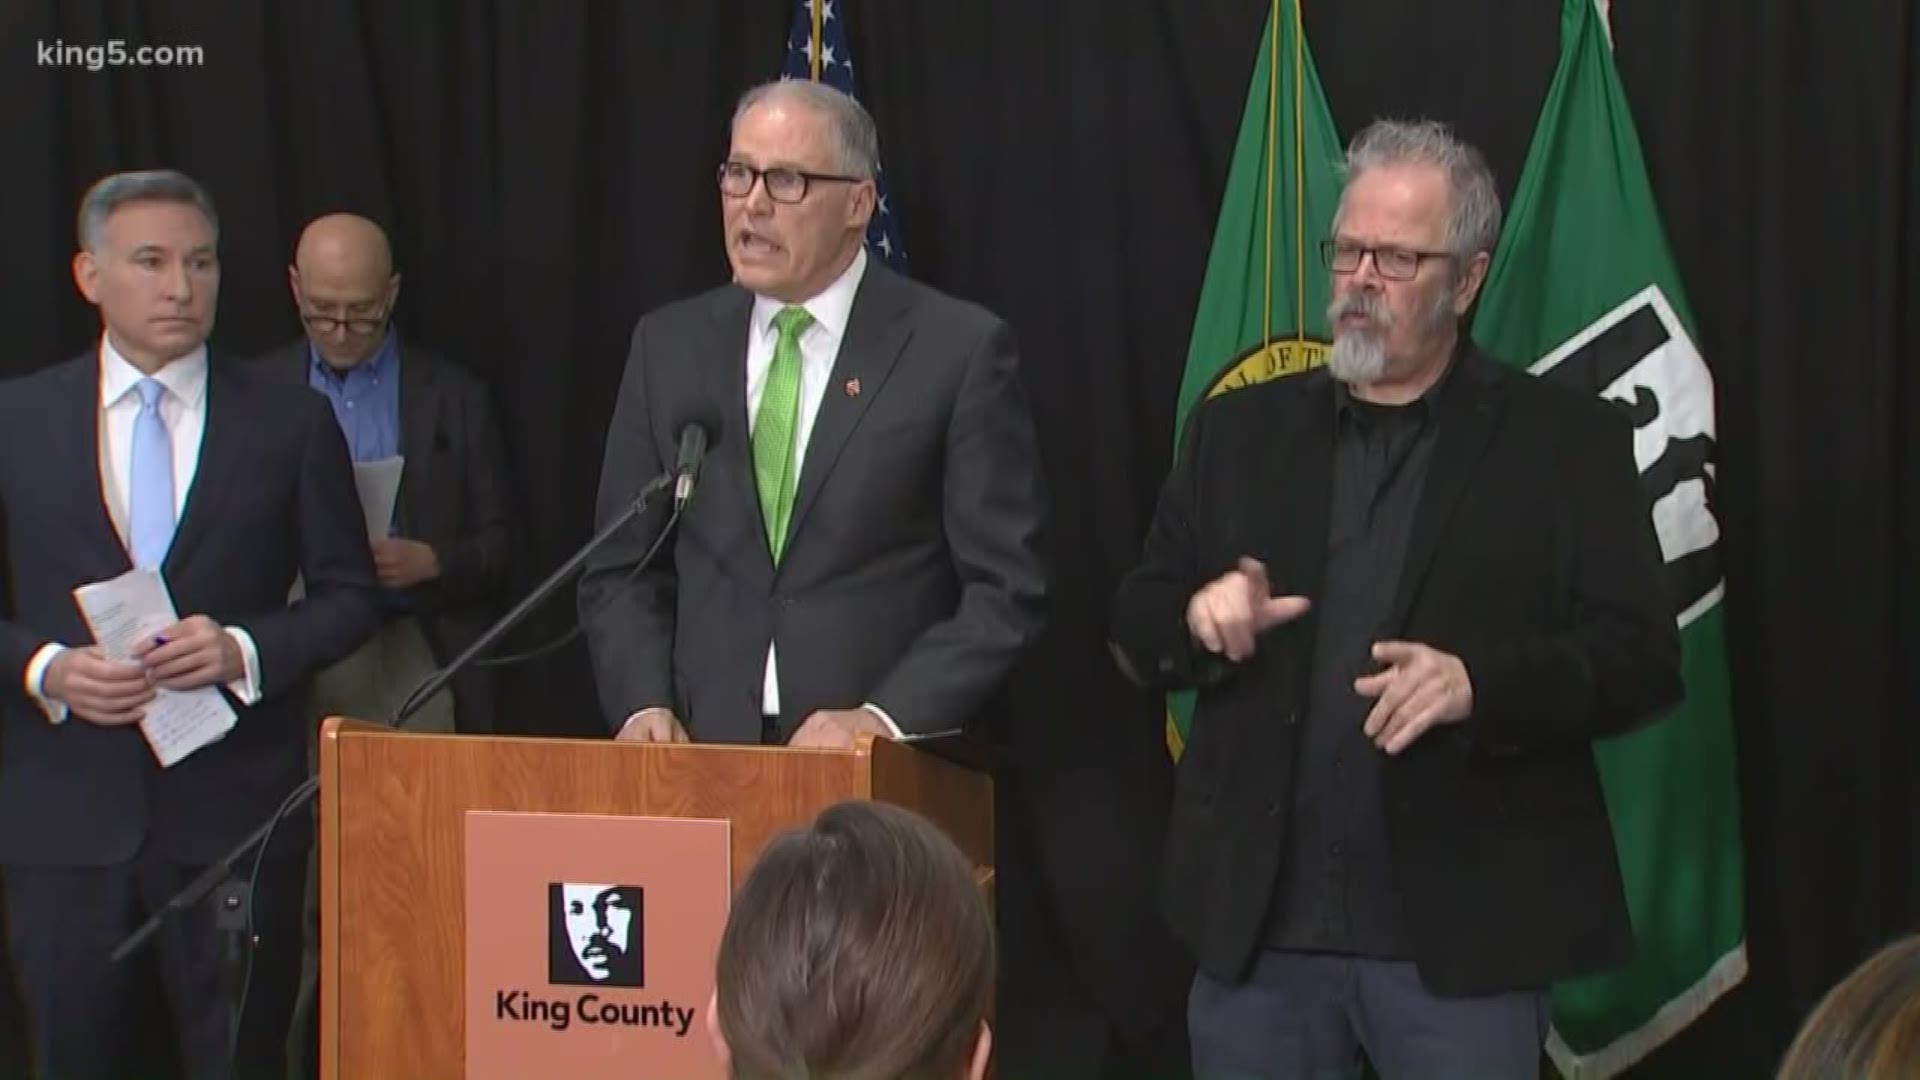 Washington governor Jay Inslee has deemed any public gathering of over 250 people in King, Pierce and Snohomish Counties as prohibited until further notice.